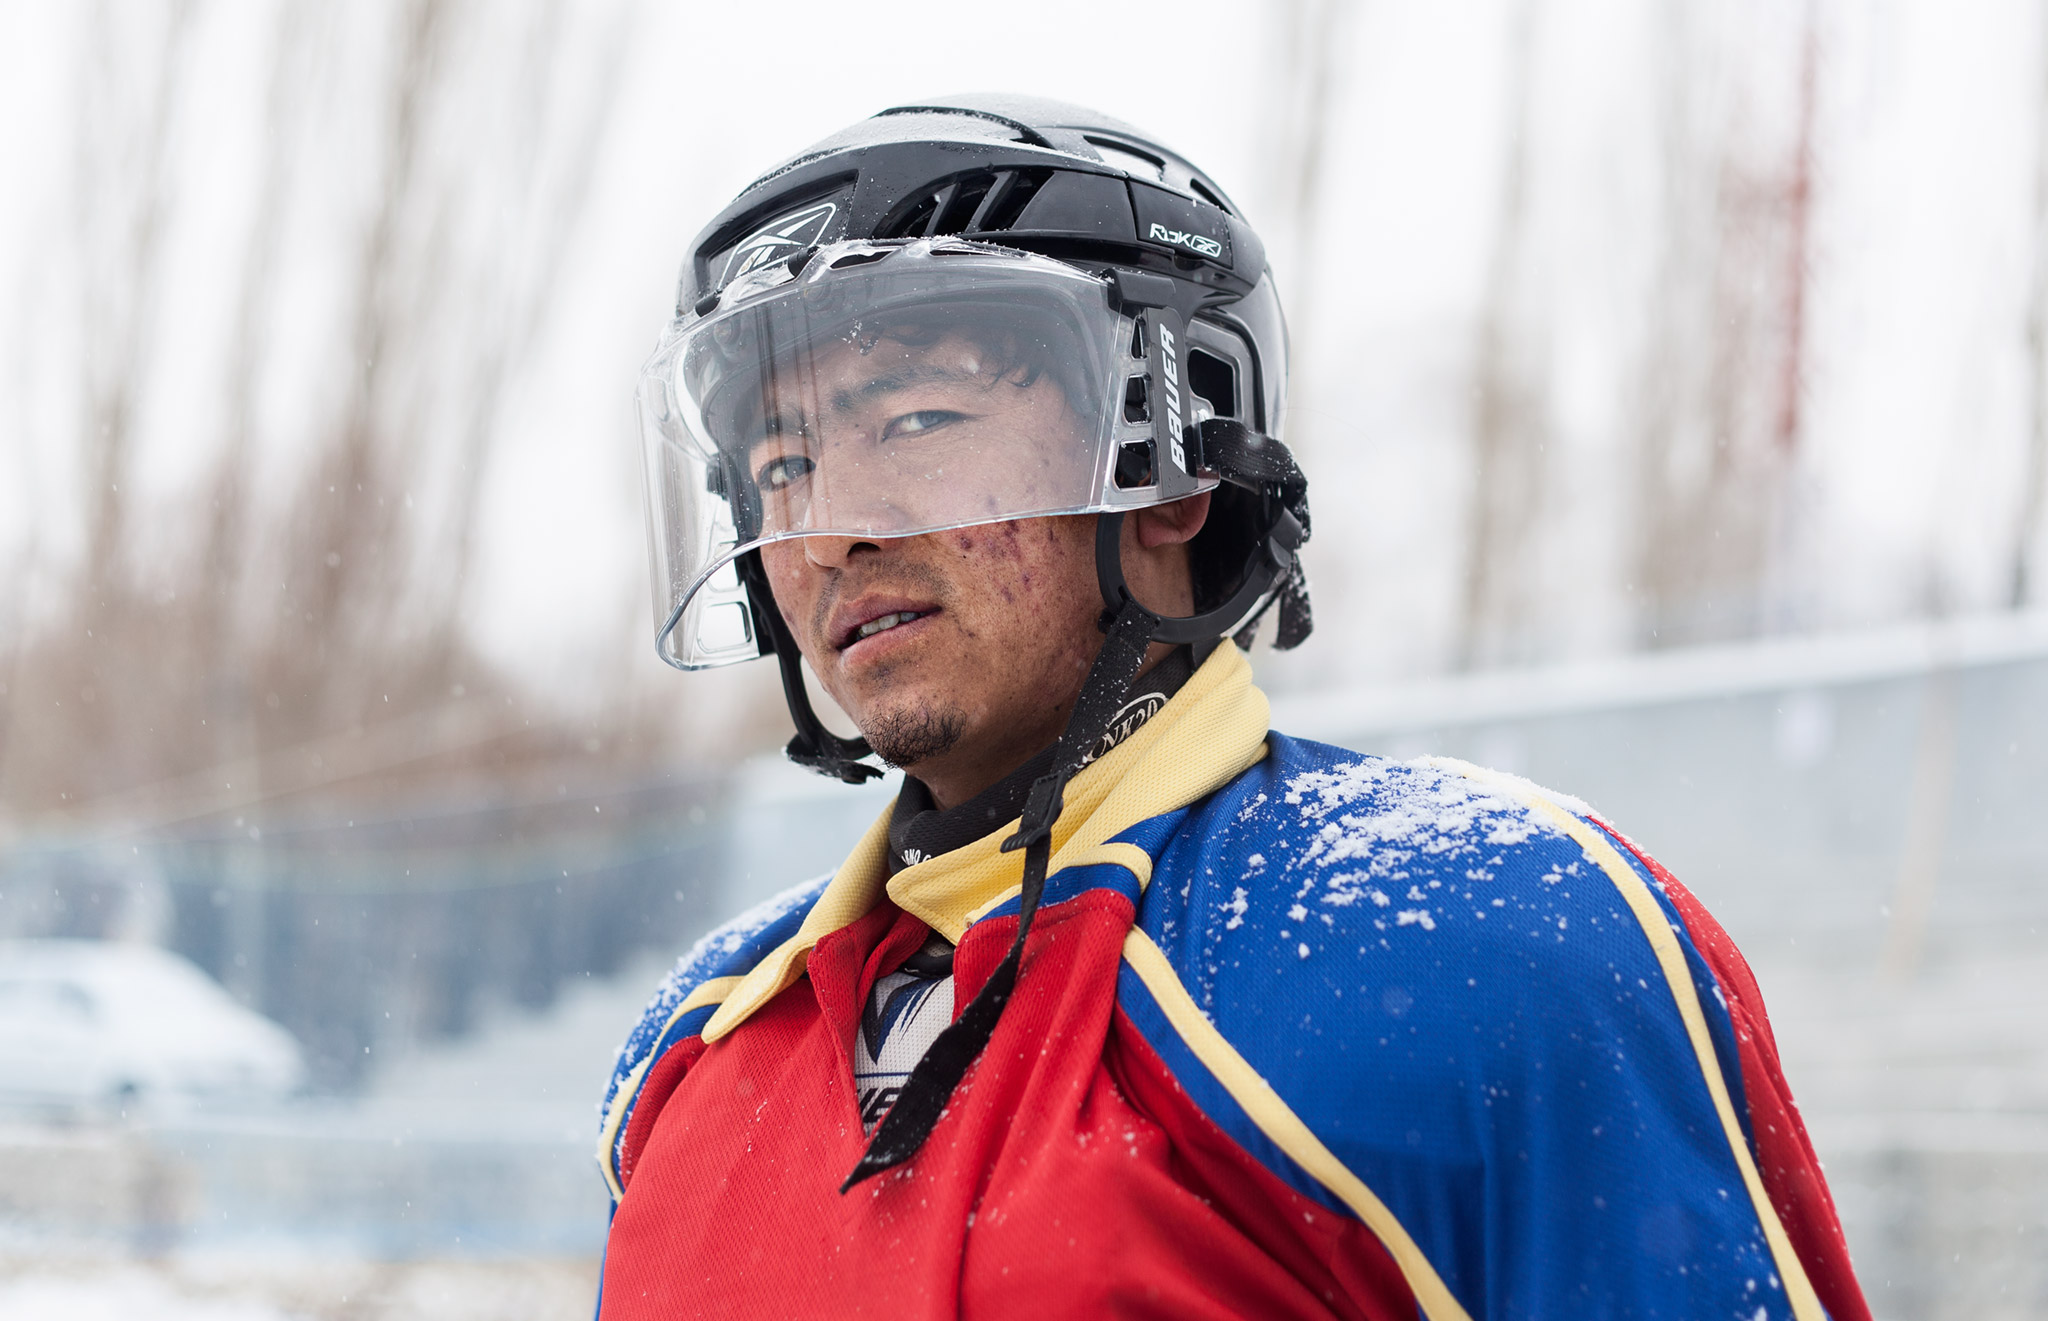 Hockey In The Himalayas